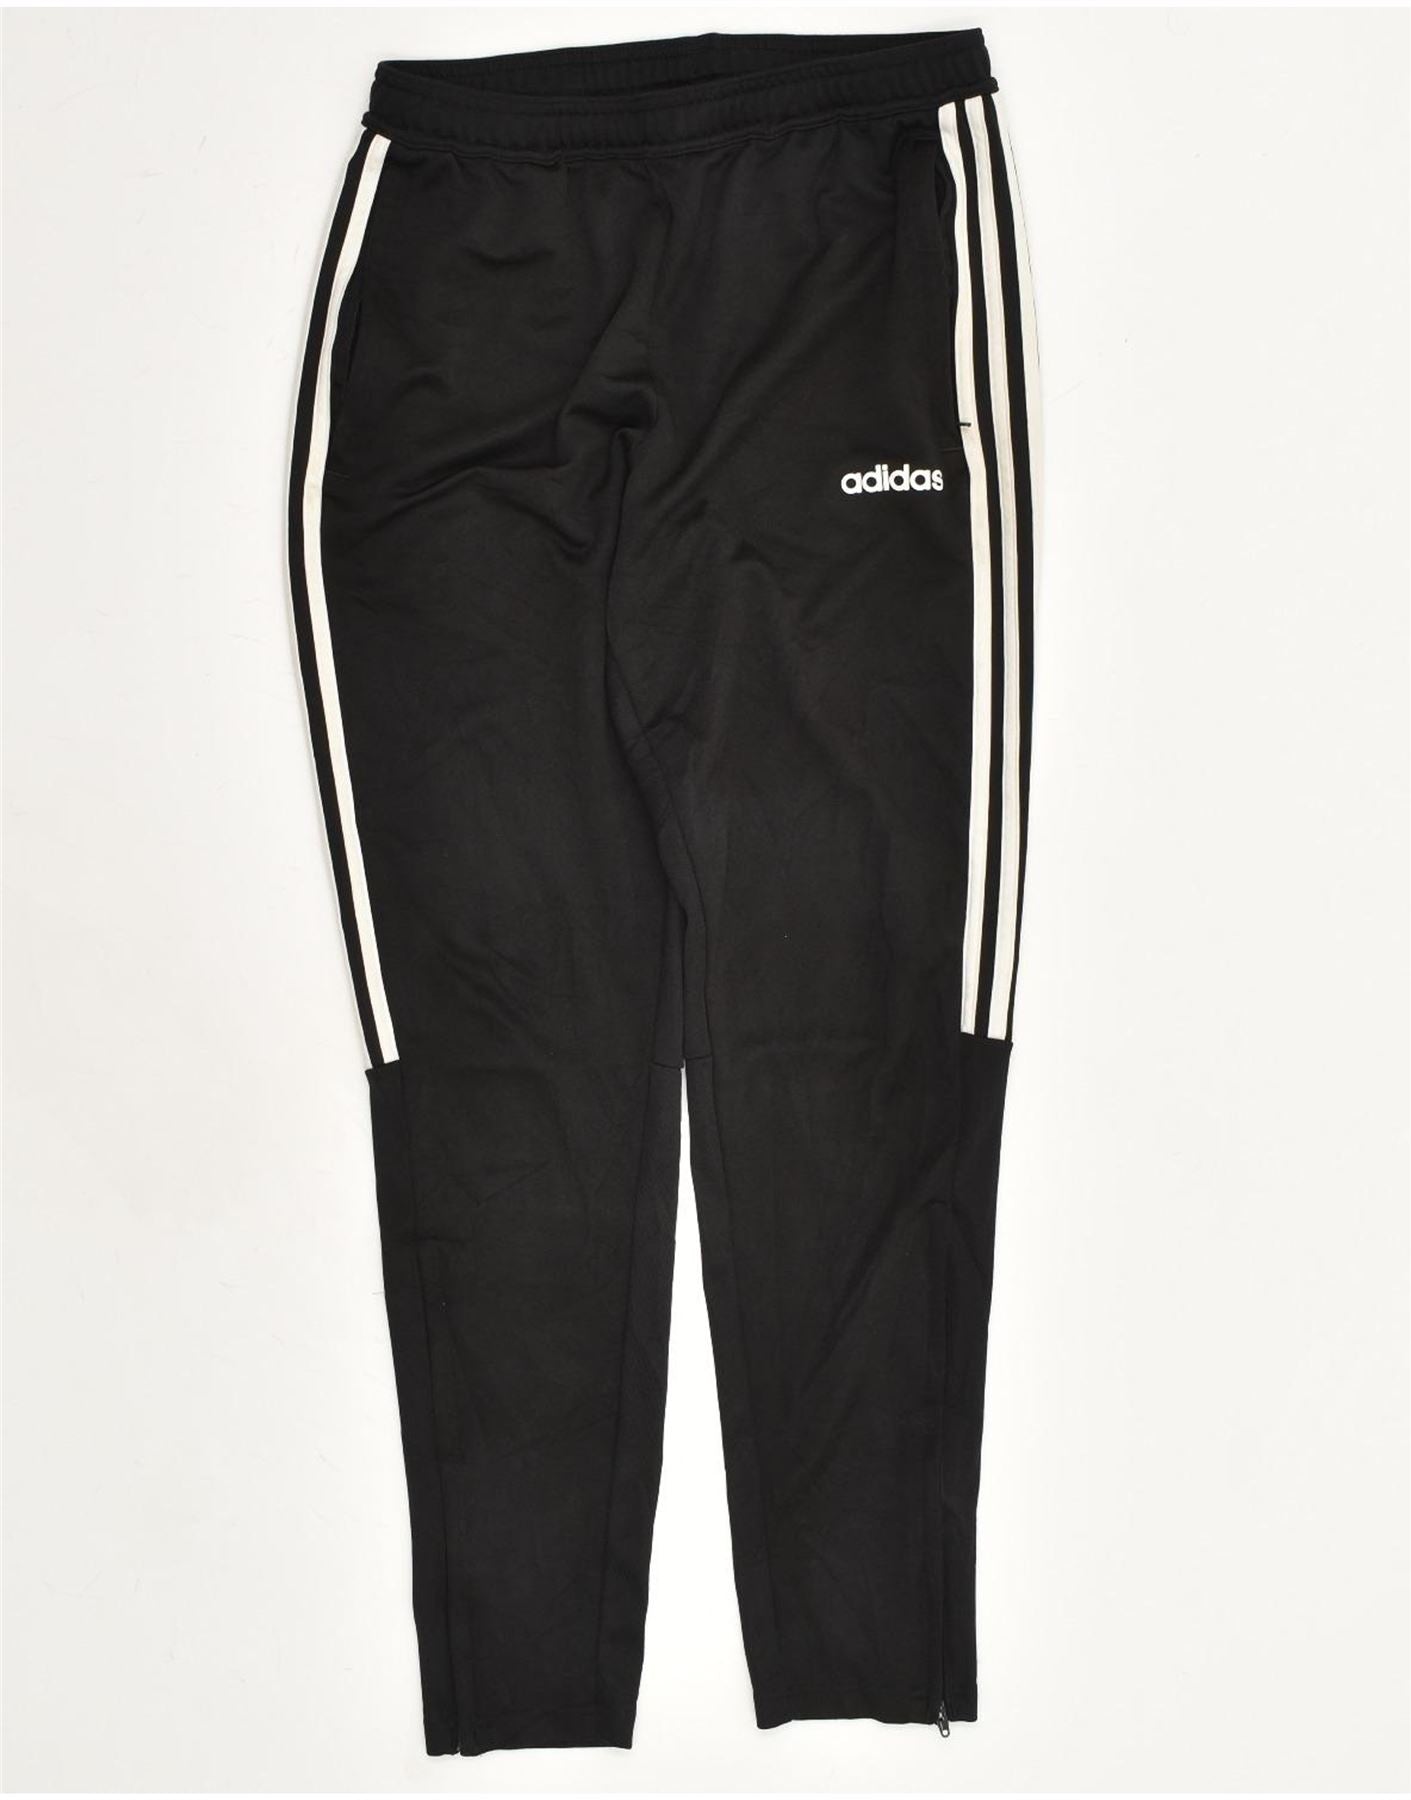 adidas Climalite Men Activewear Trousers Pants for Men for sale | eBay